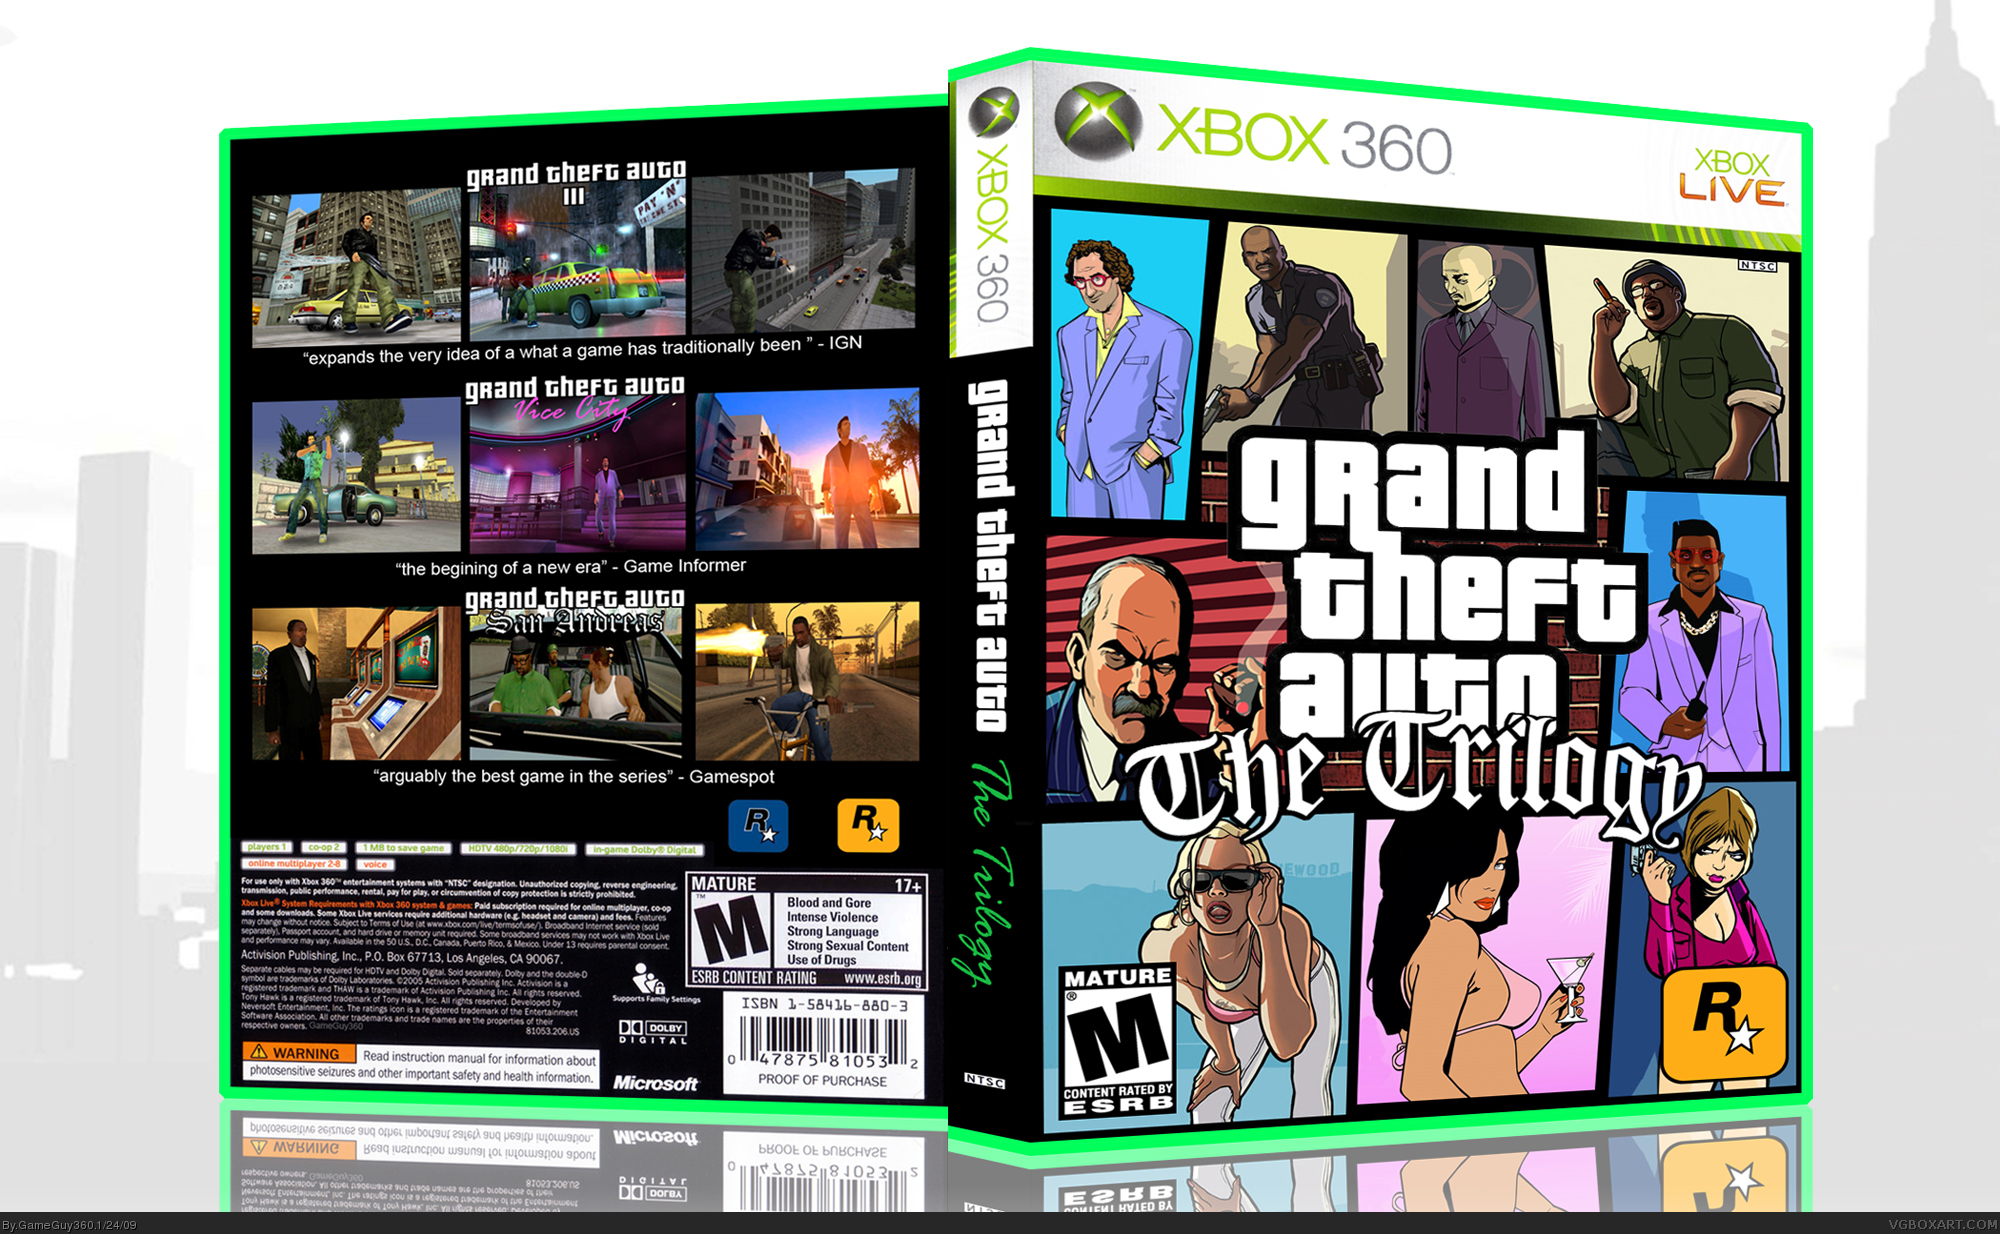 Grand Theft Auto: The Trilogy box cover